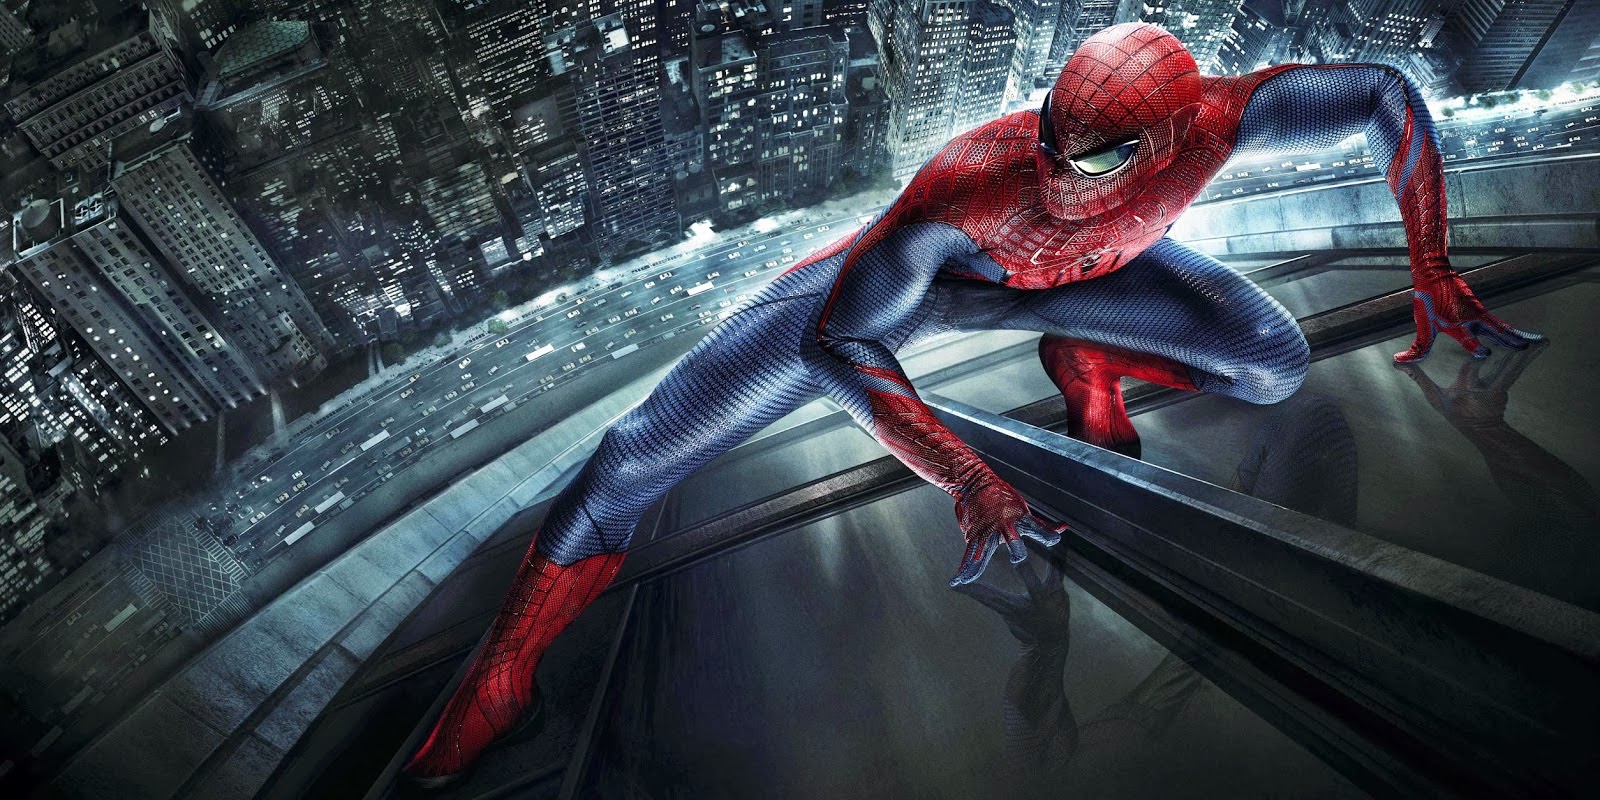 June 10th 2016 – ‘The Amazing Spider-Man 3’ Day